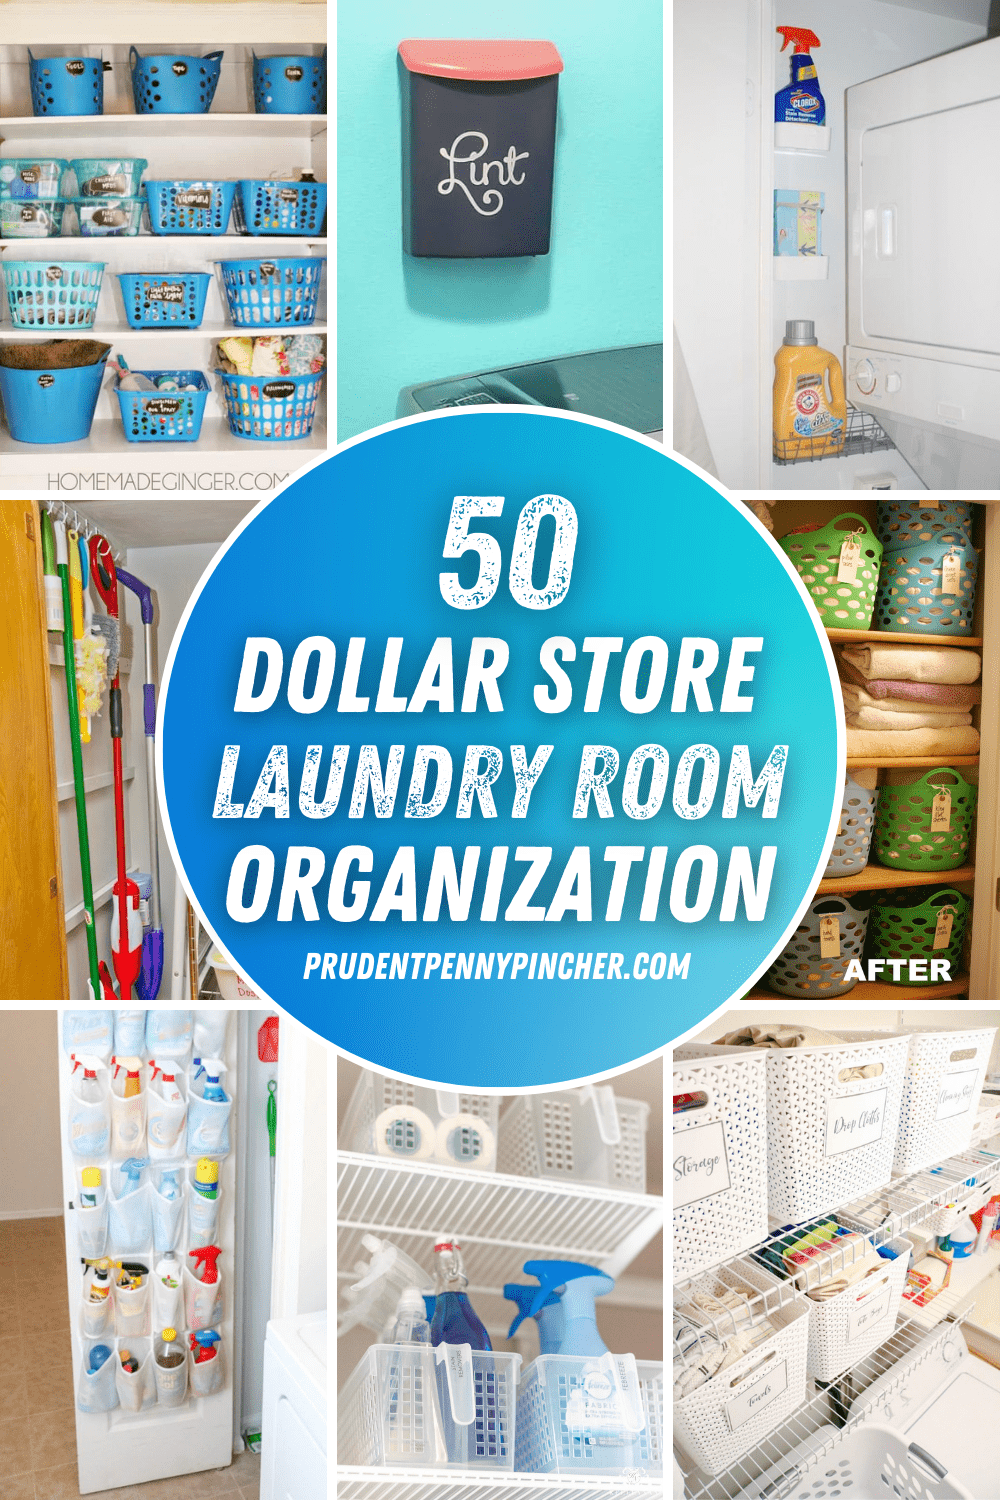 https://www.prudentpennypincher.com/wp-content/uploads/2019/02/ds-laundry-room-organization.png